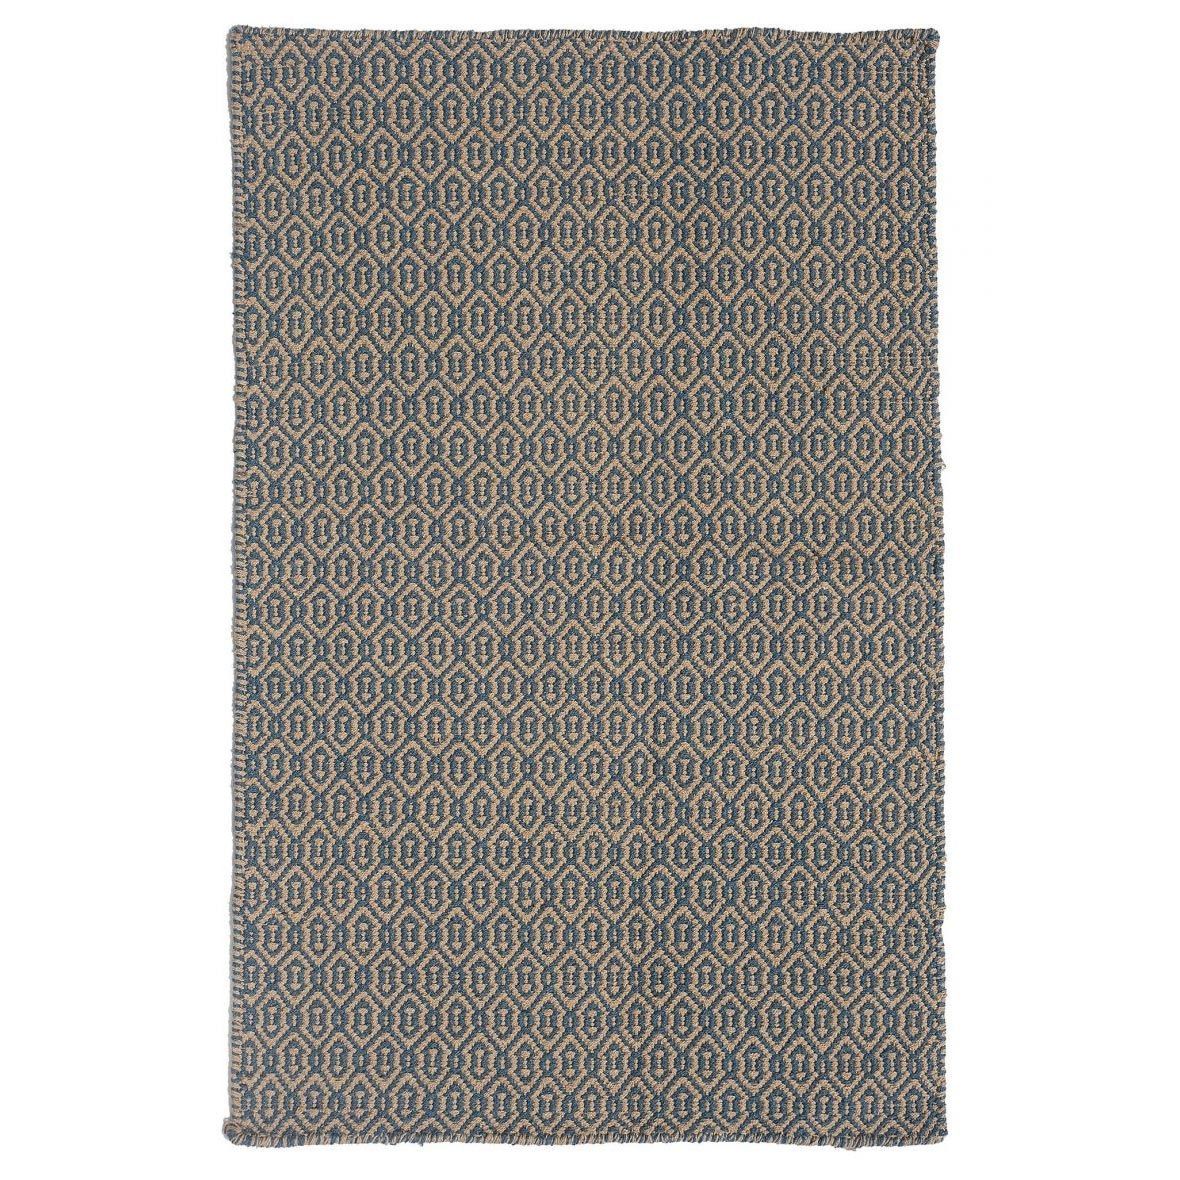 18 Best Washable Rugs To In 2021, Washable Rugs For Kitchen